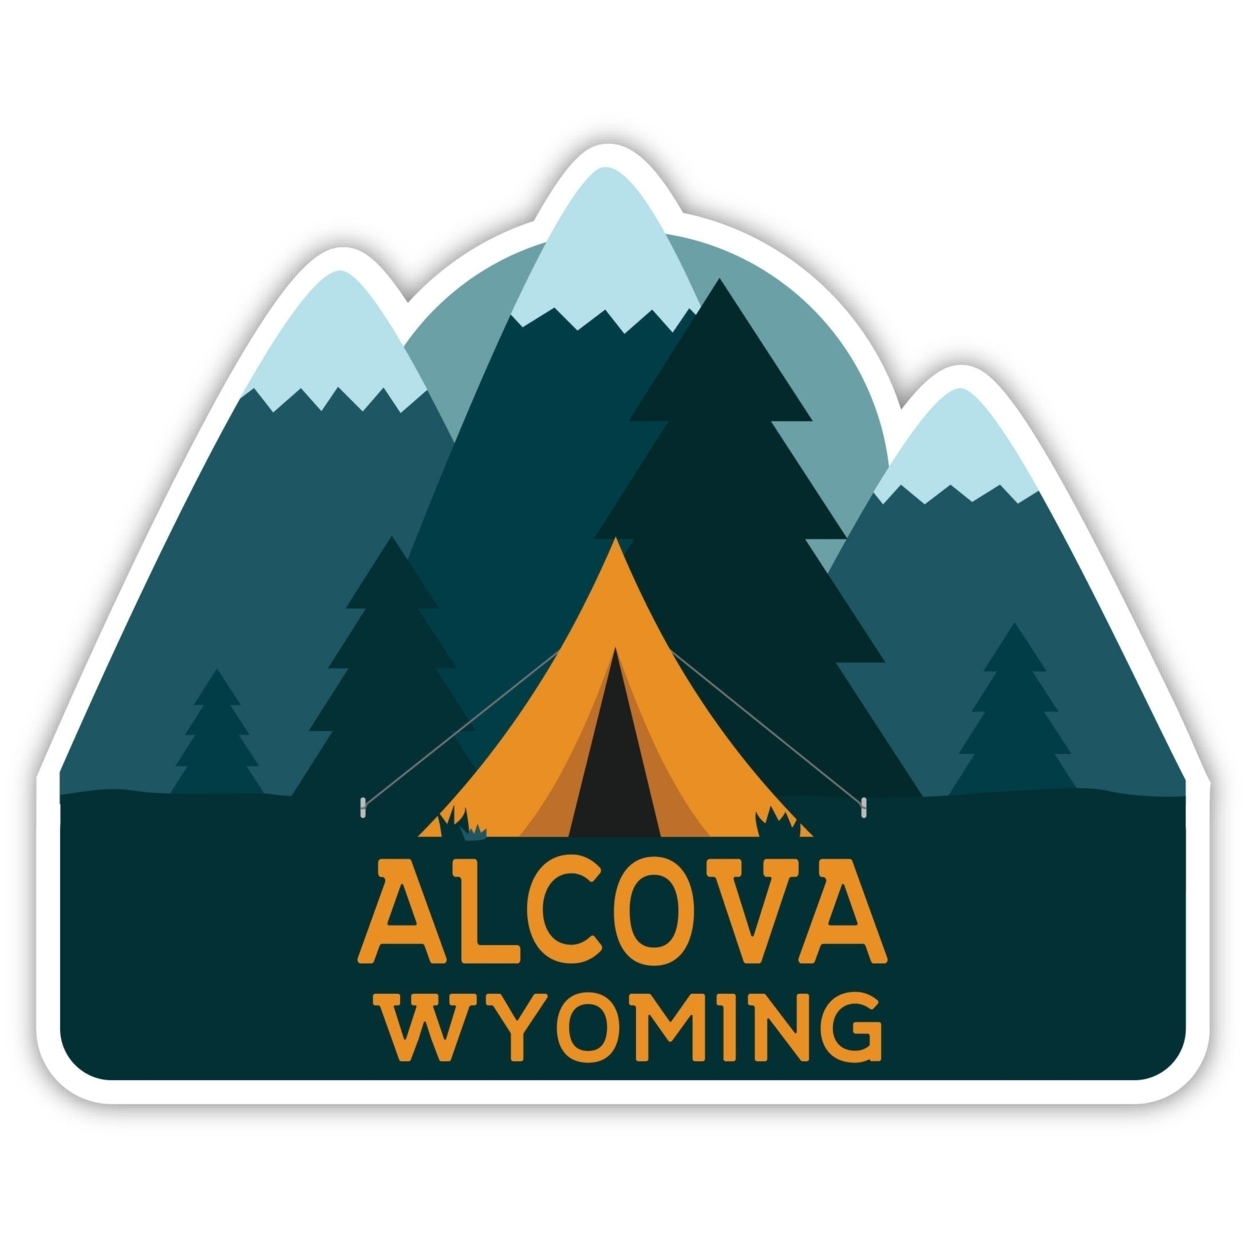 Alcova Wyoming Souvenir Decorative Stickers (Choose Theme And Size) - 4-Pack, 4-Inch, Tent